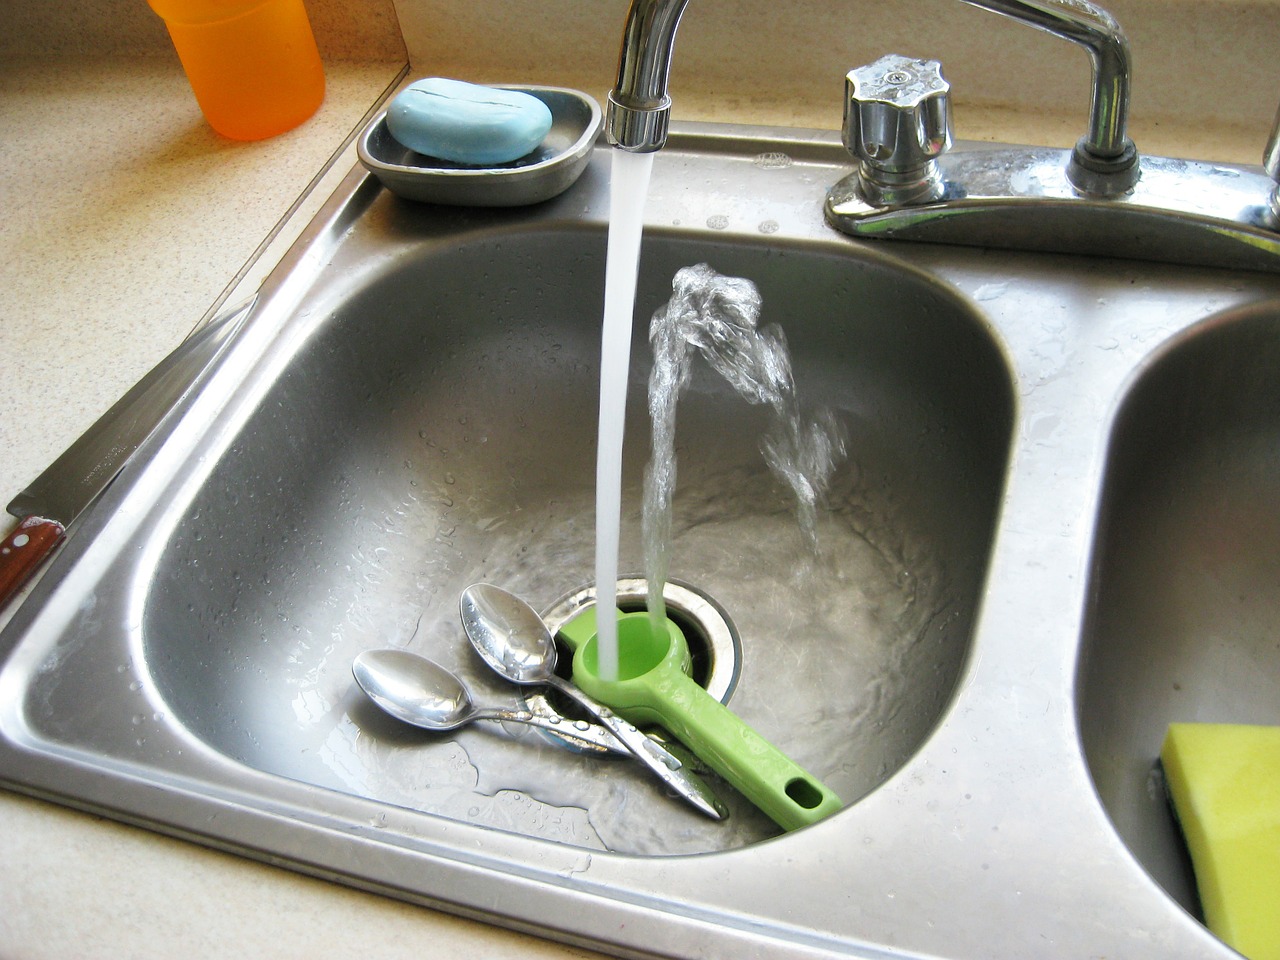 How to unclog a sink drain. No-chemicals method